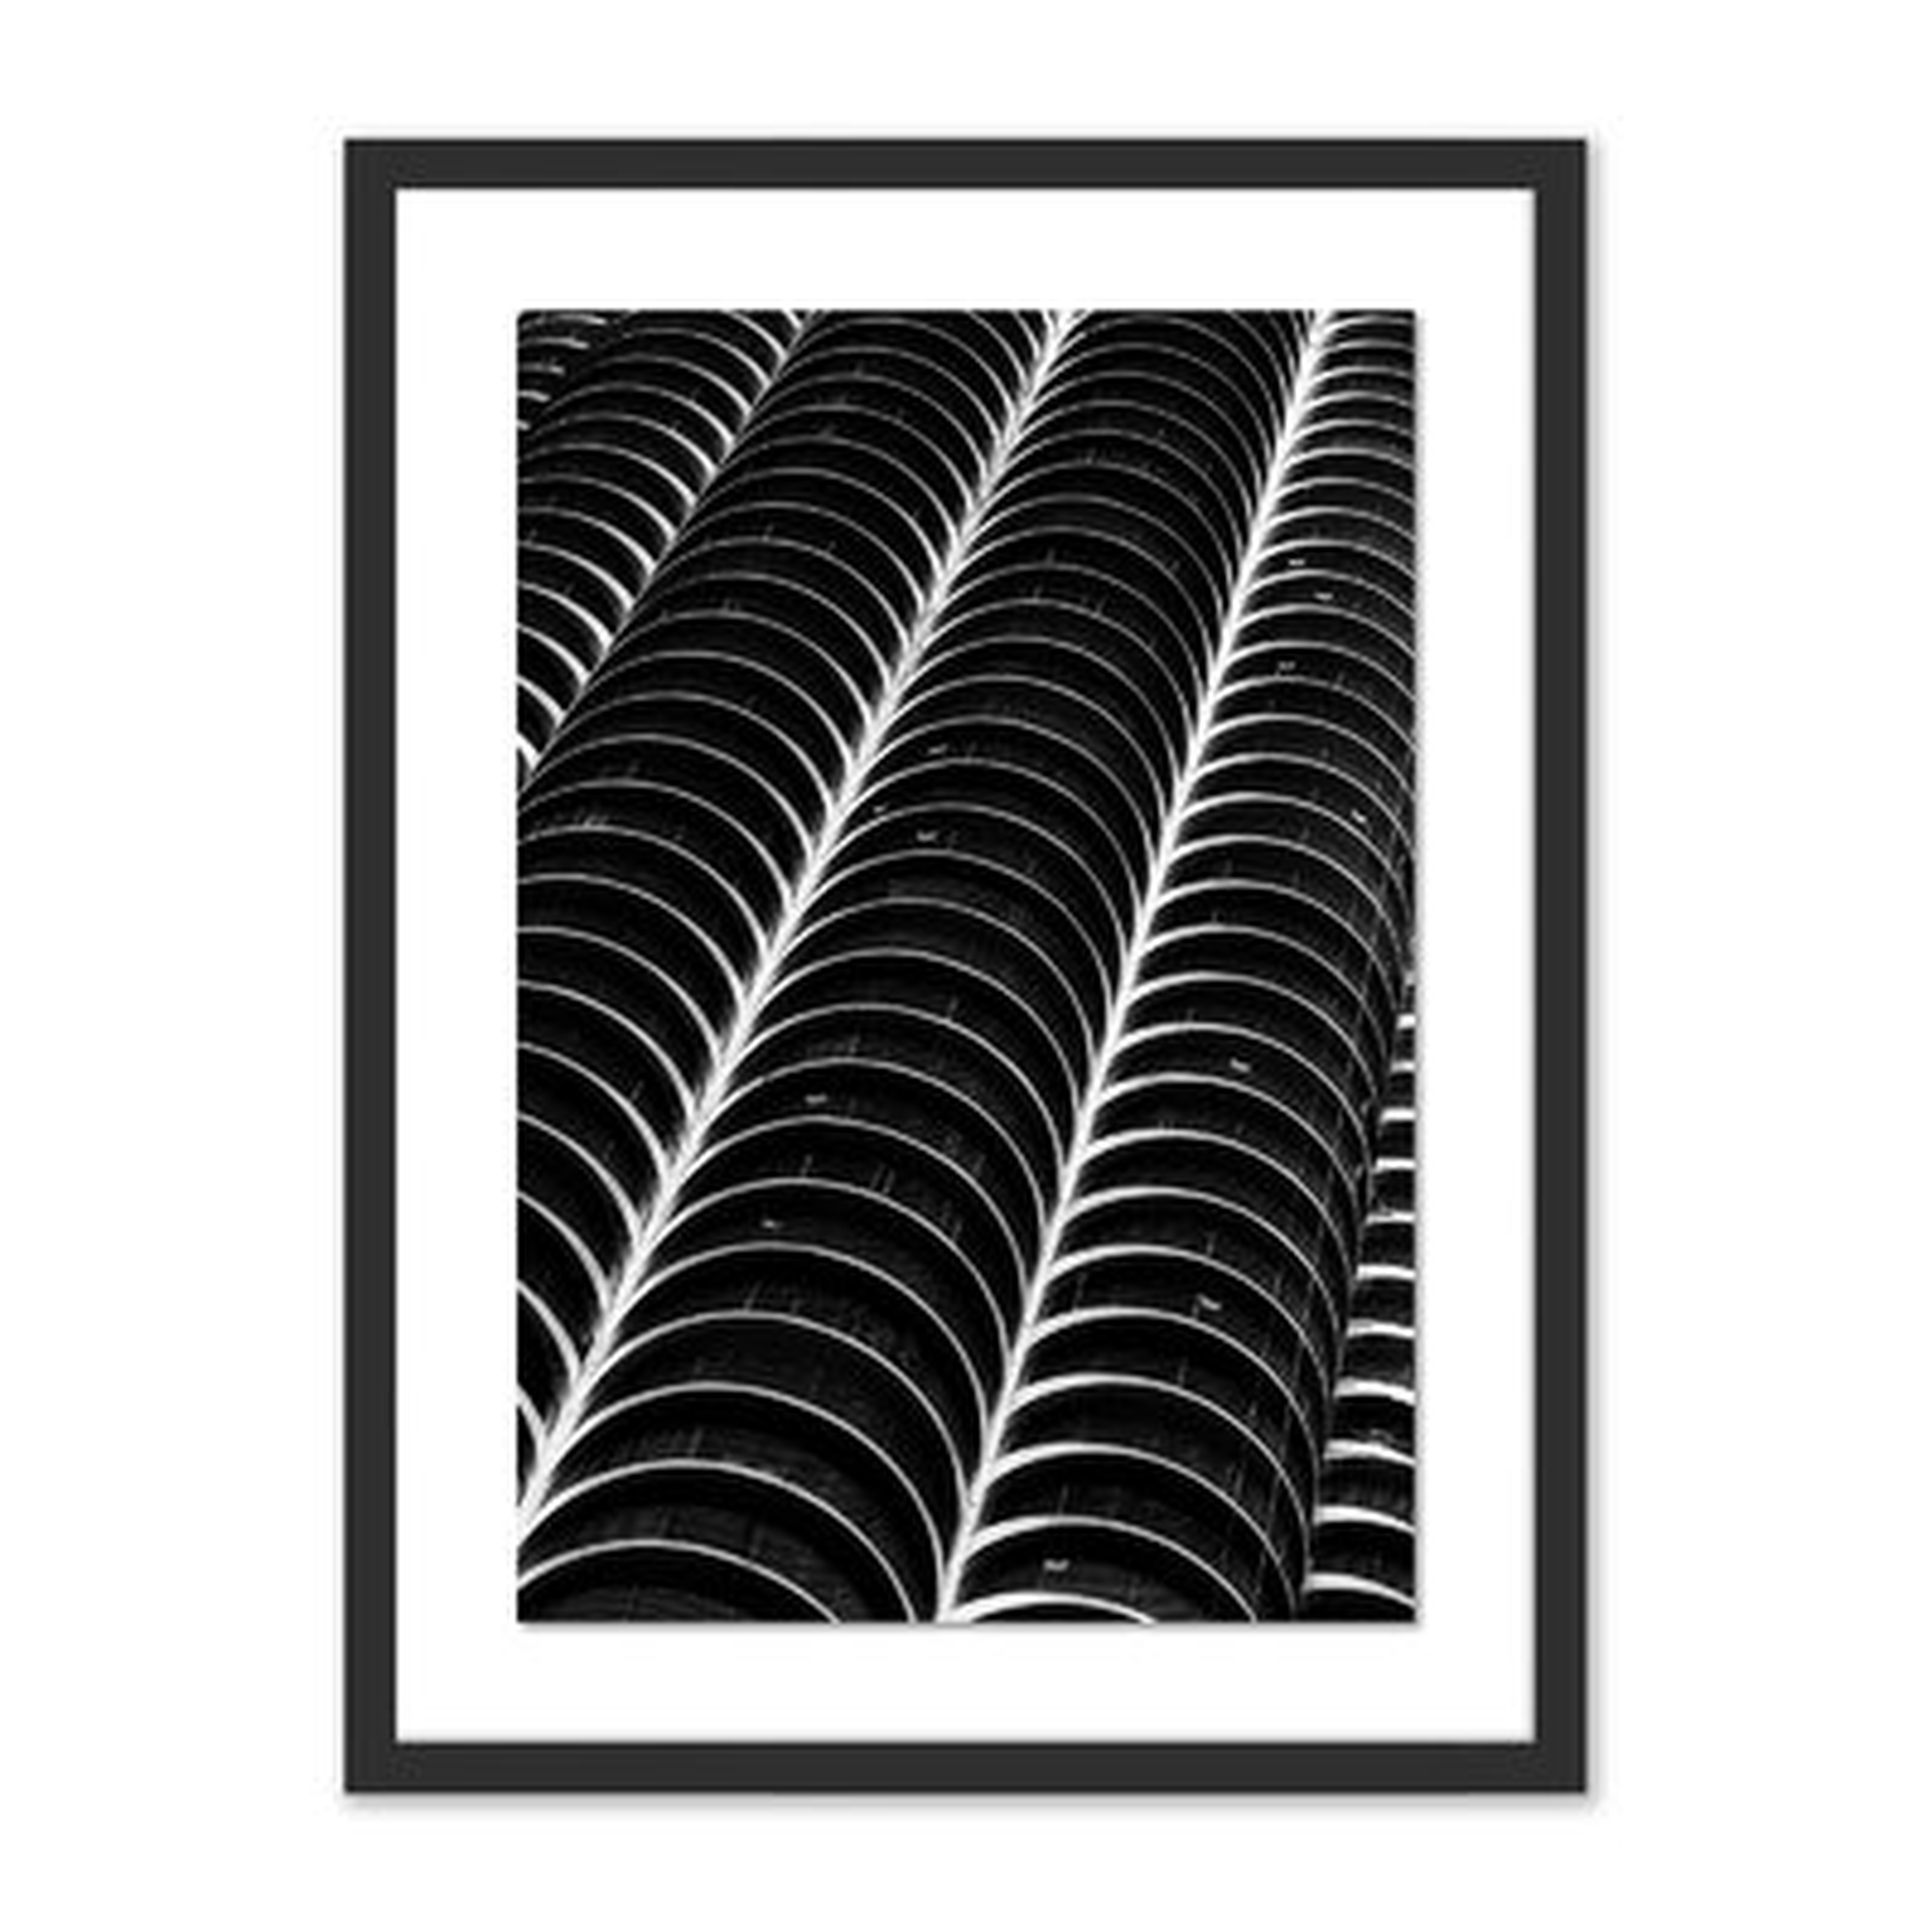 Marina City 'Marina City-Chicago' by Shawn Thomas Picture Frame Photograph Print on Paper - Wayfair